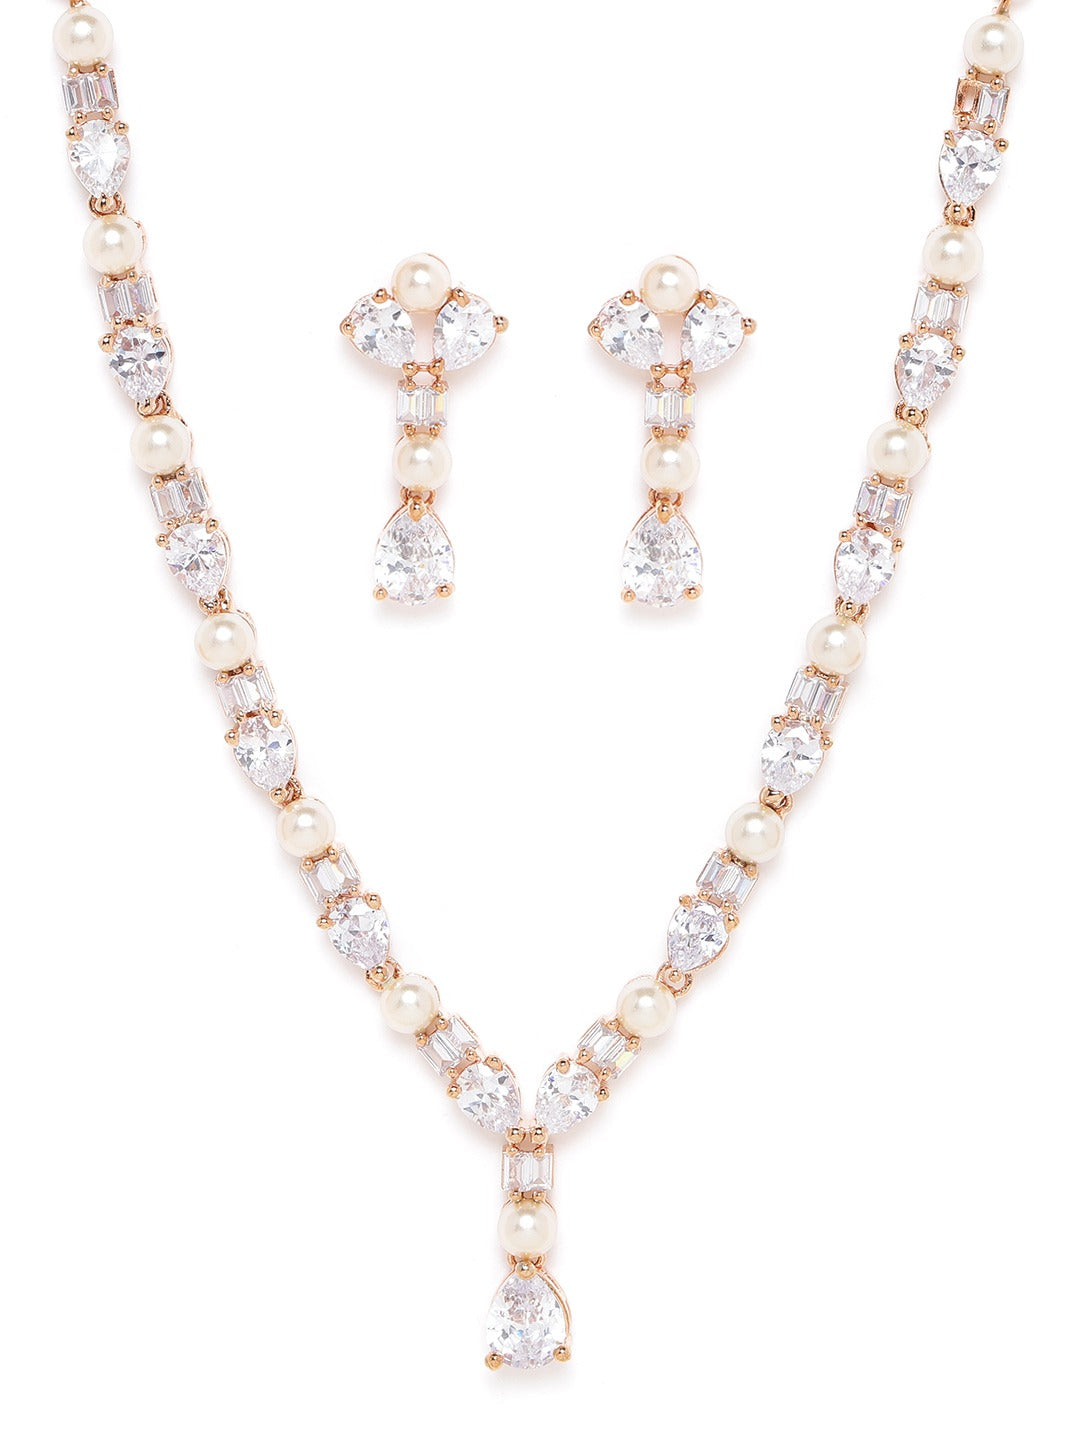 Off-White Rose Gold-Plated AD-Studded Beaded Handcrafted Jewellery Set